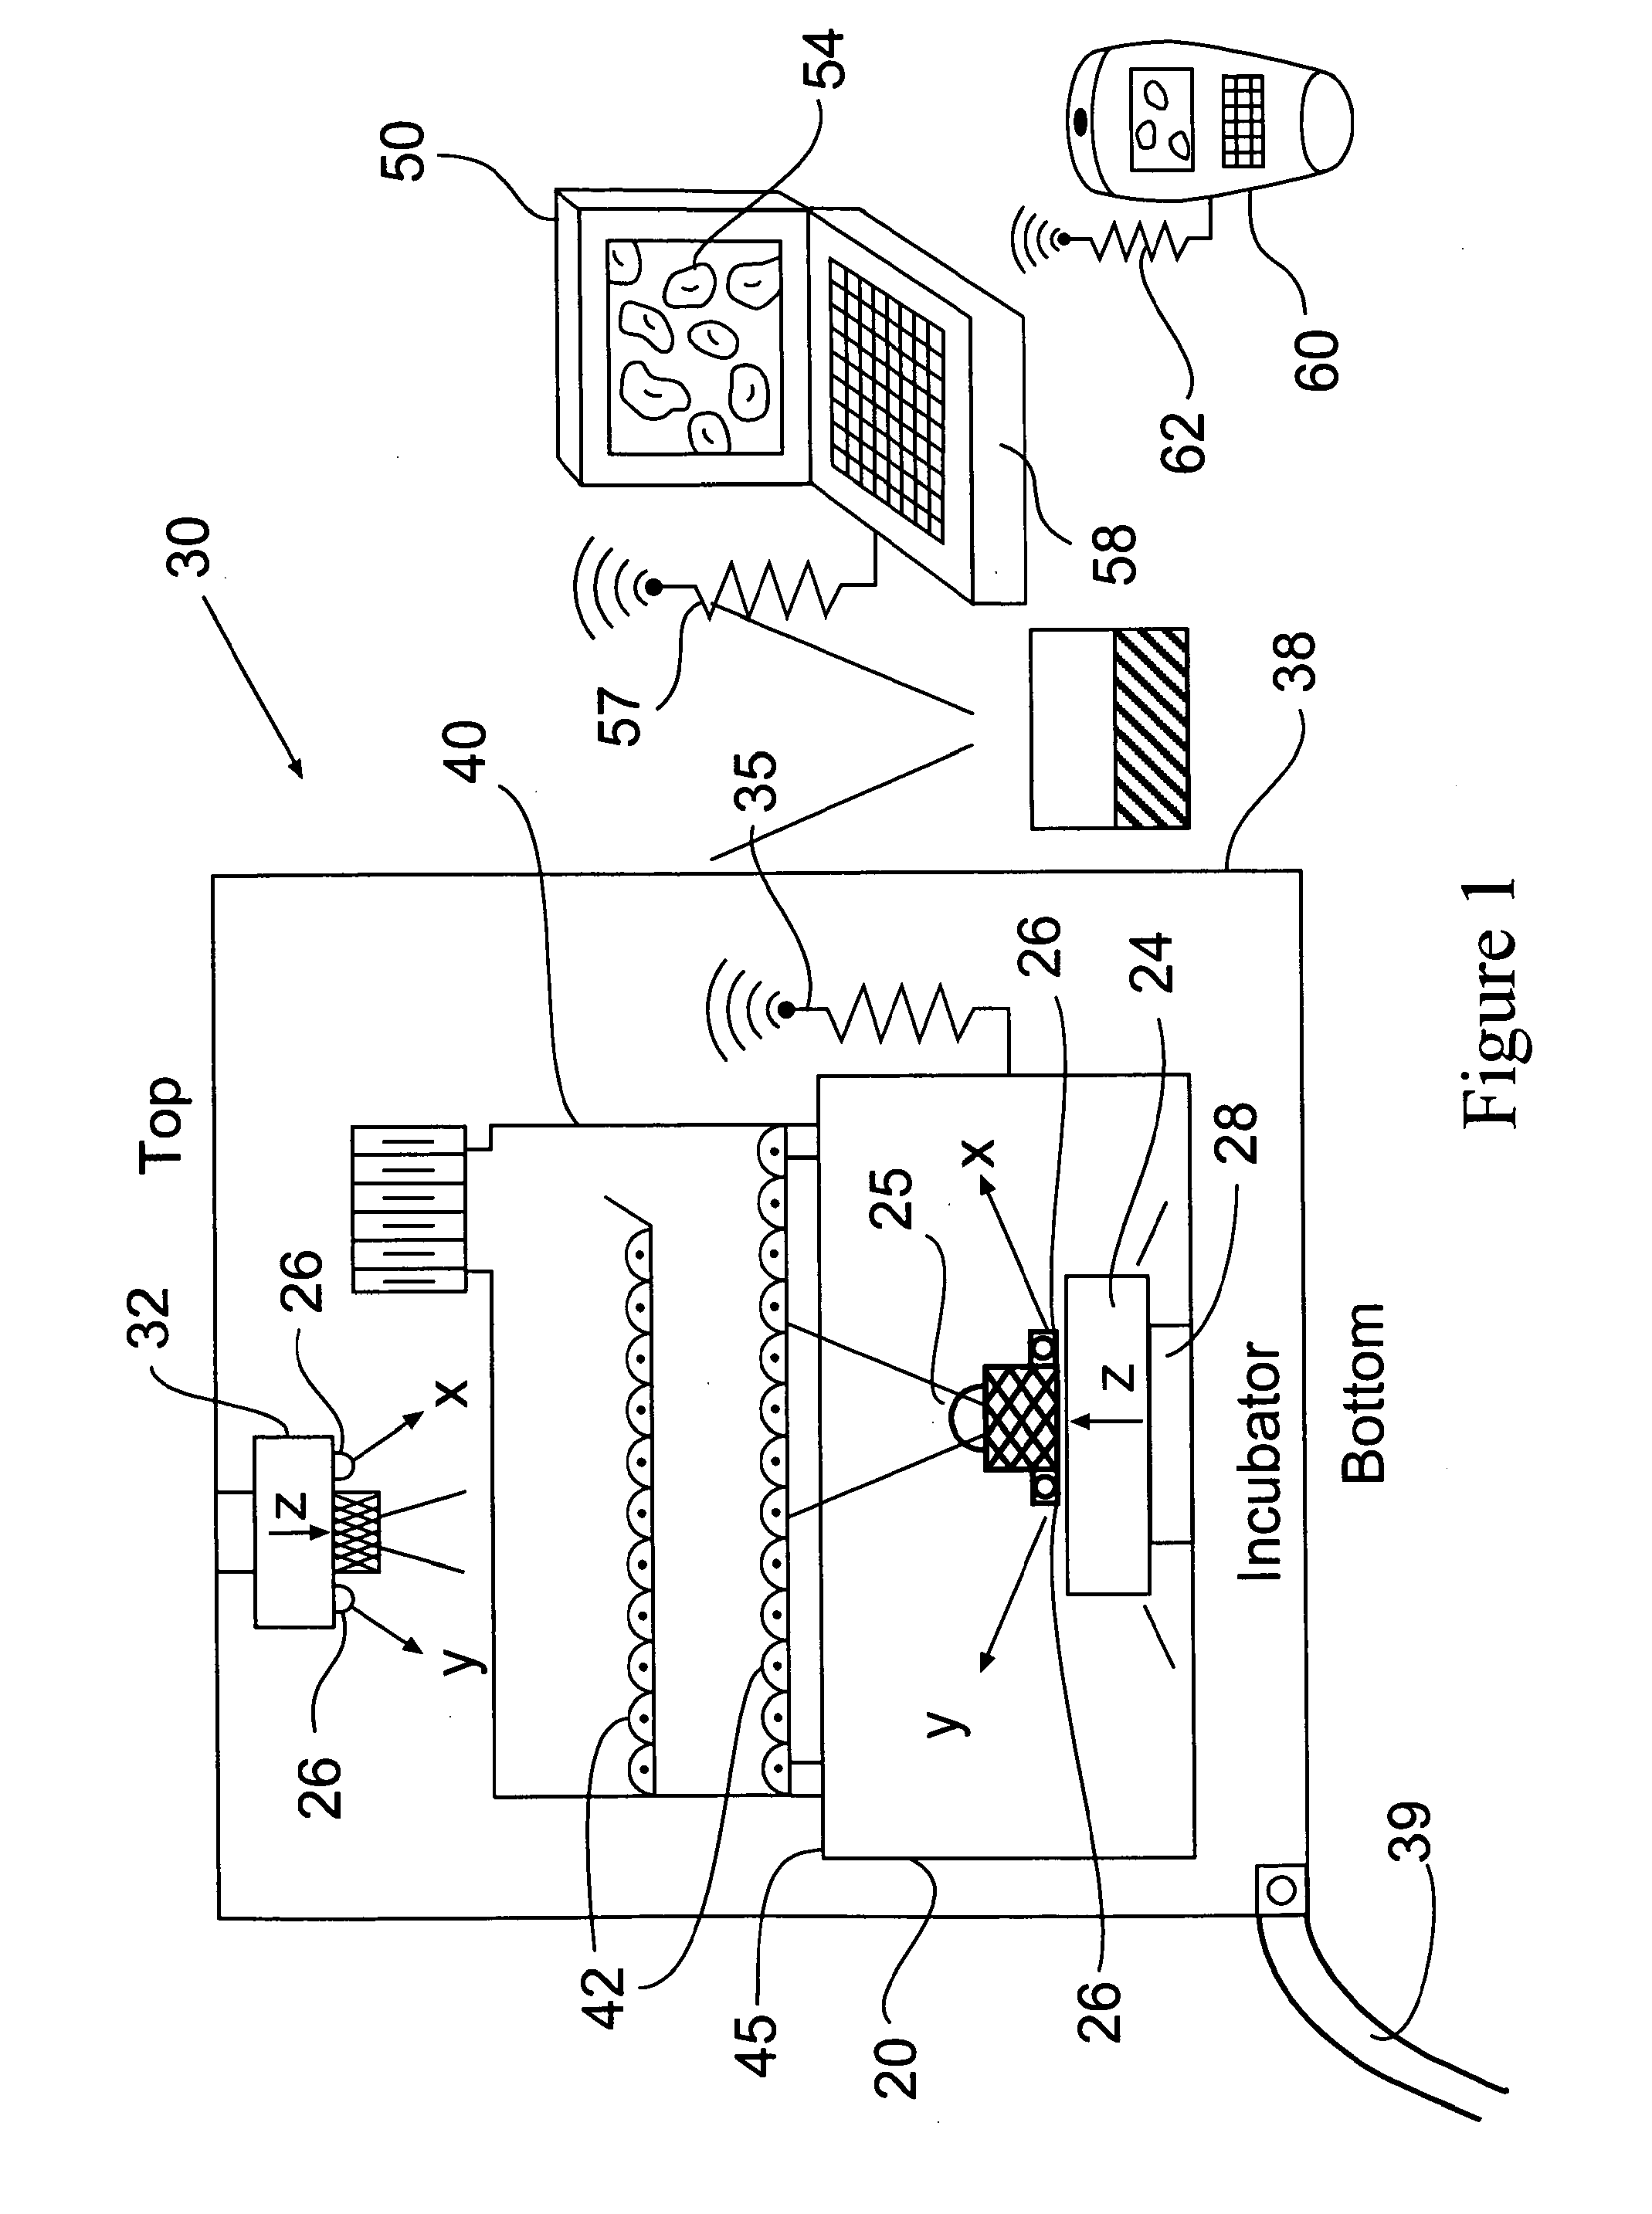 Cell Image Capturing and Remote Monitoring Systems